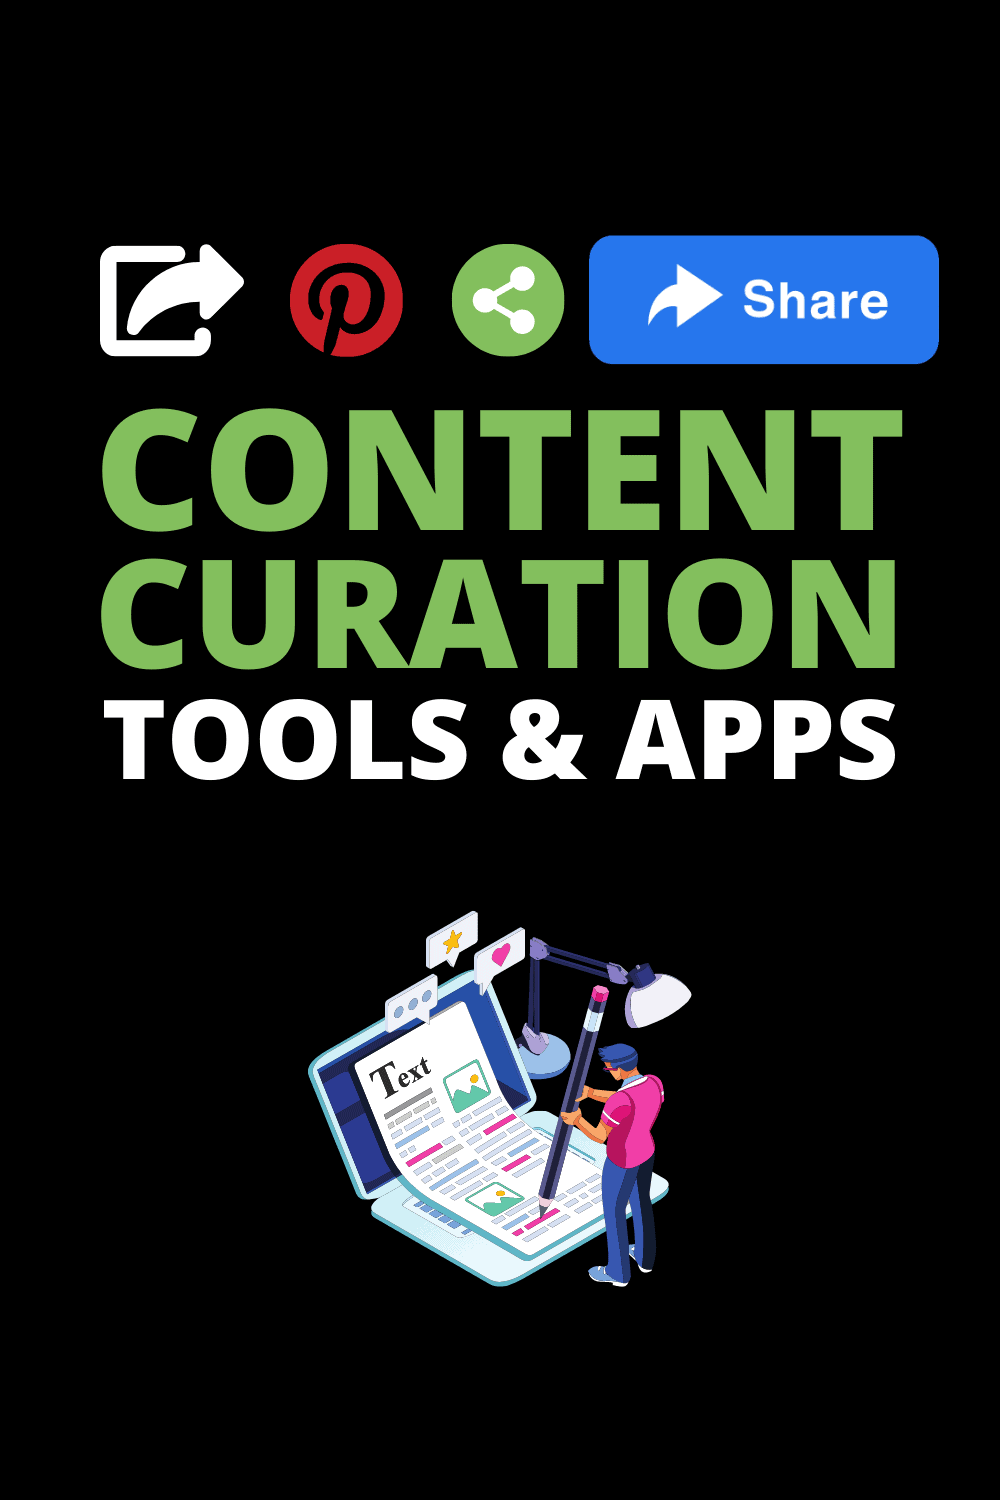 content curation tools for sharing